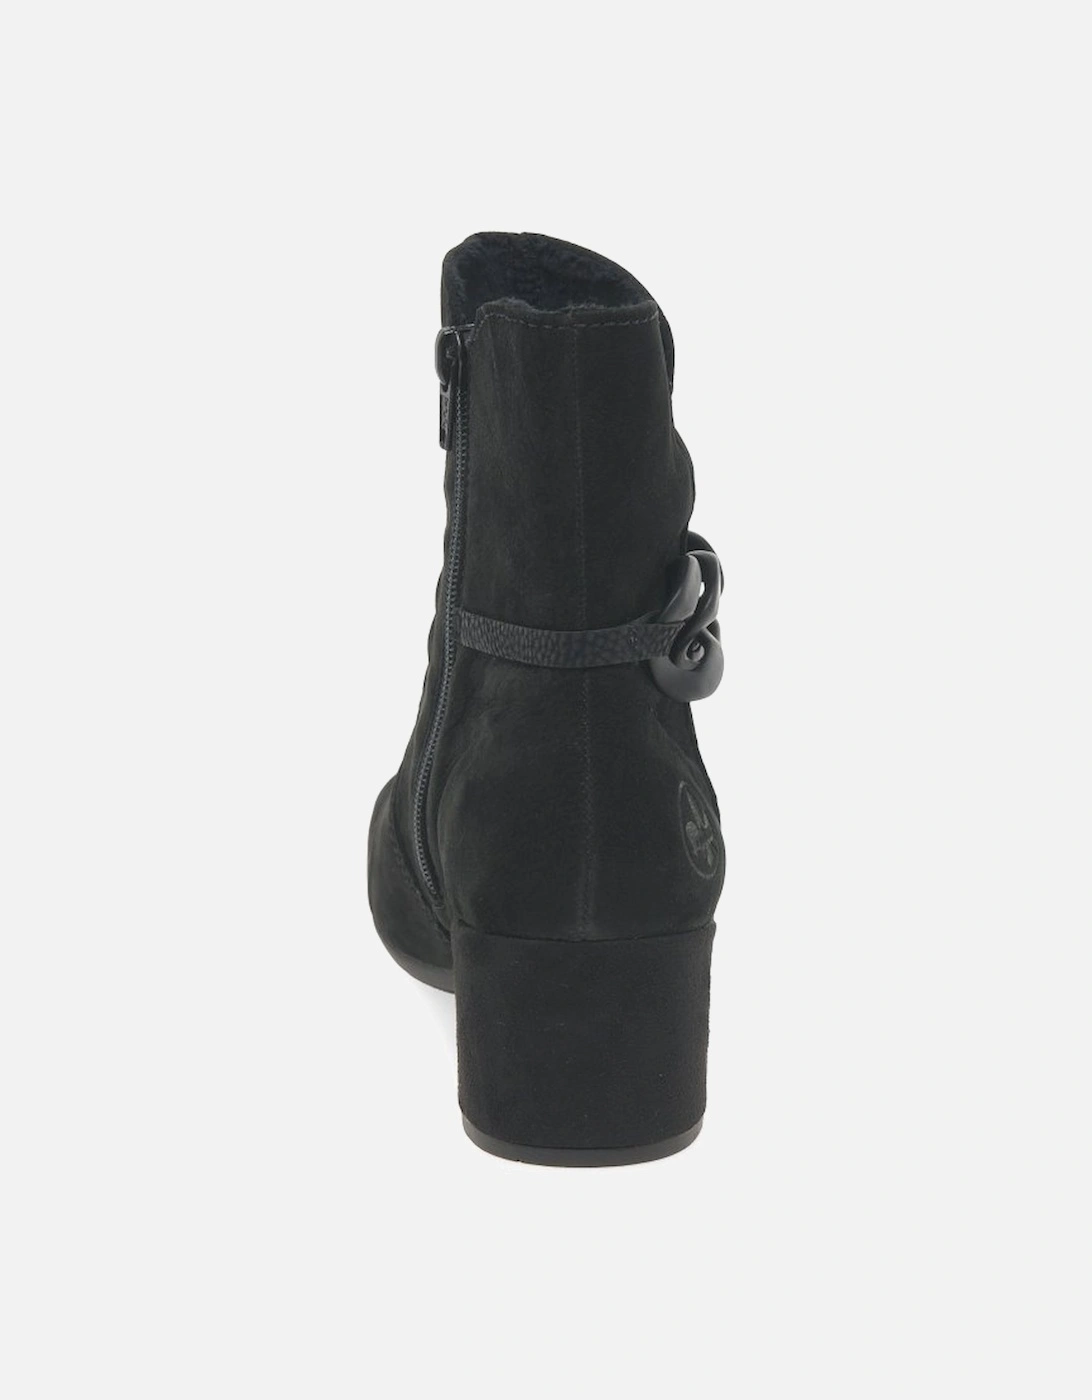 Law Womens Ankle Boots